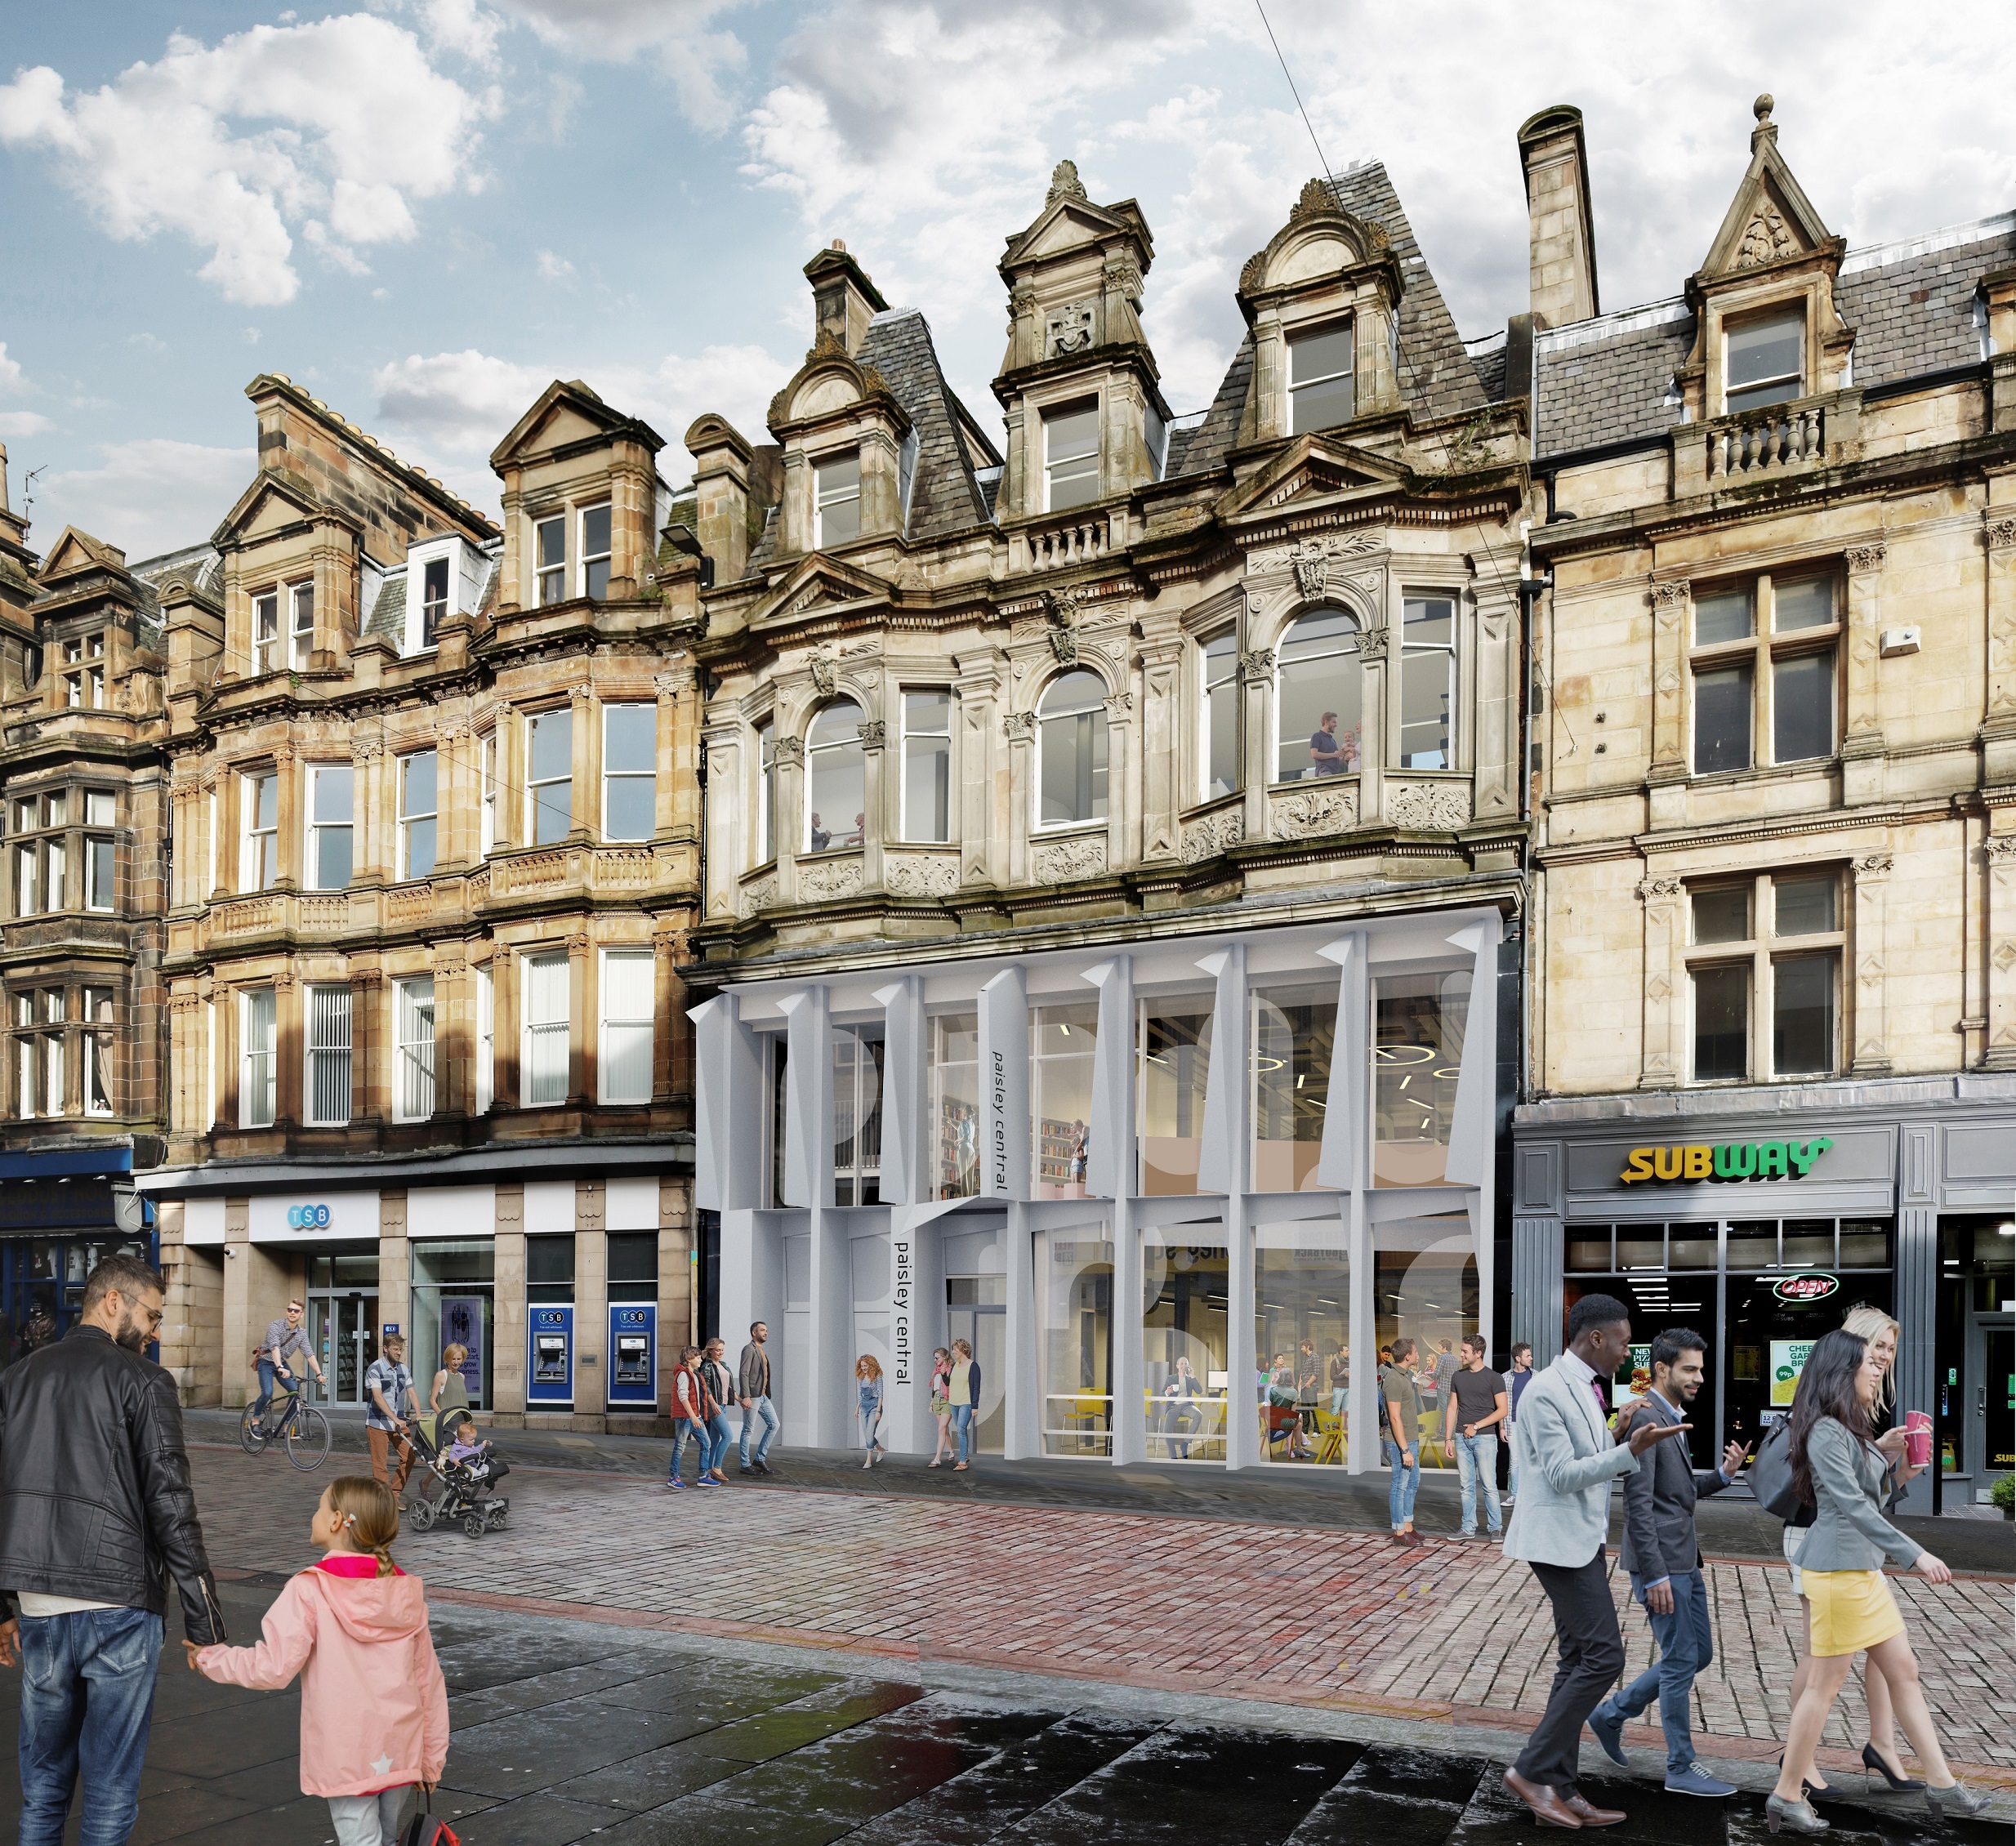 First Images Revealed Of New Paisley High Street Learning And Cultural Hub Paisley Scotland